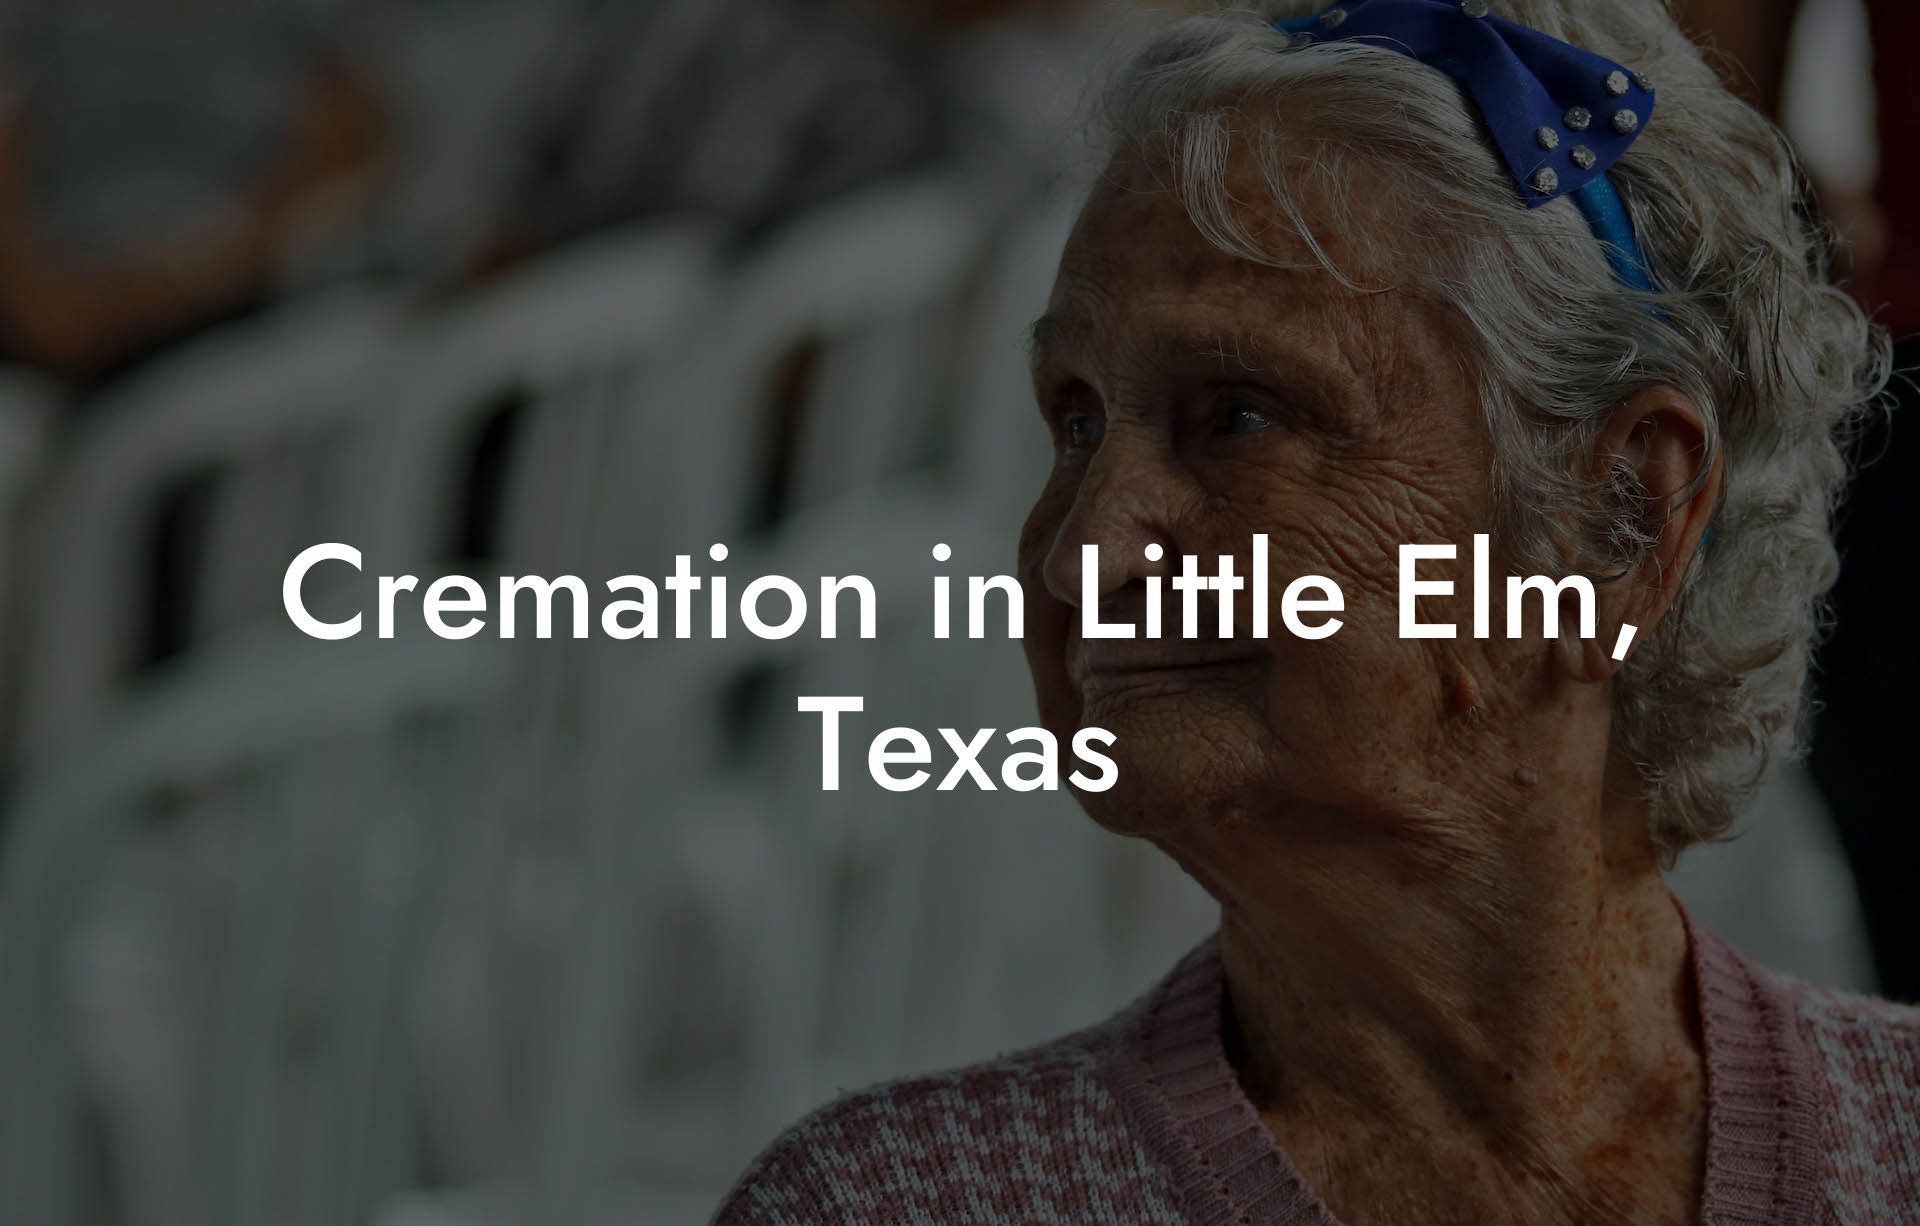 Cremation in Little Elm, Texas